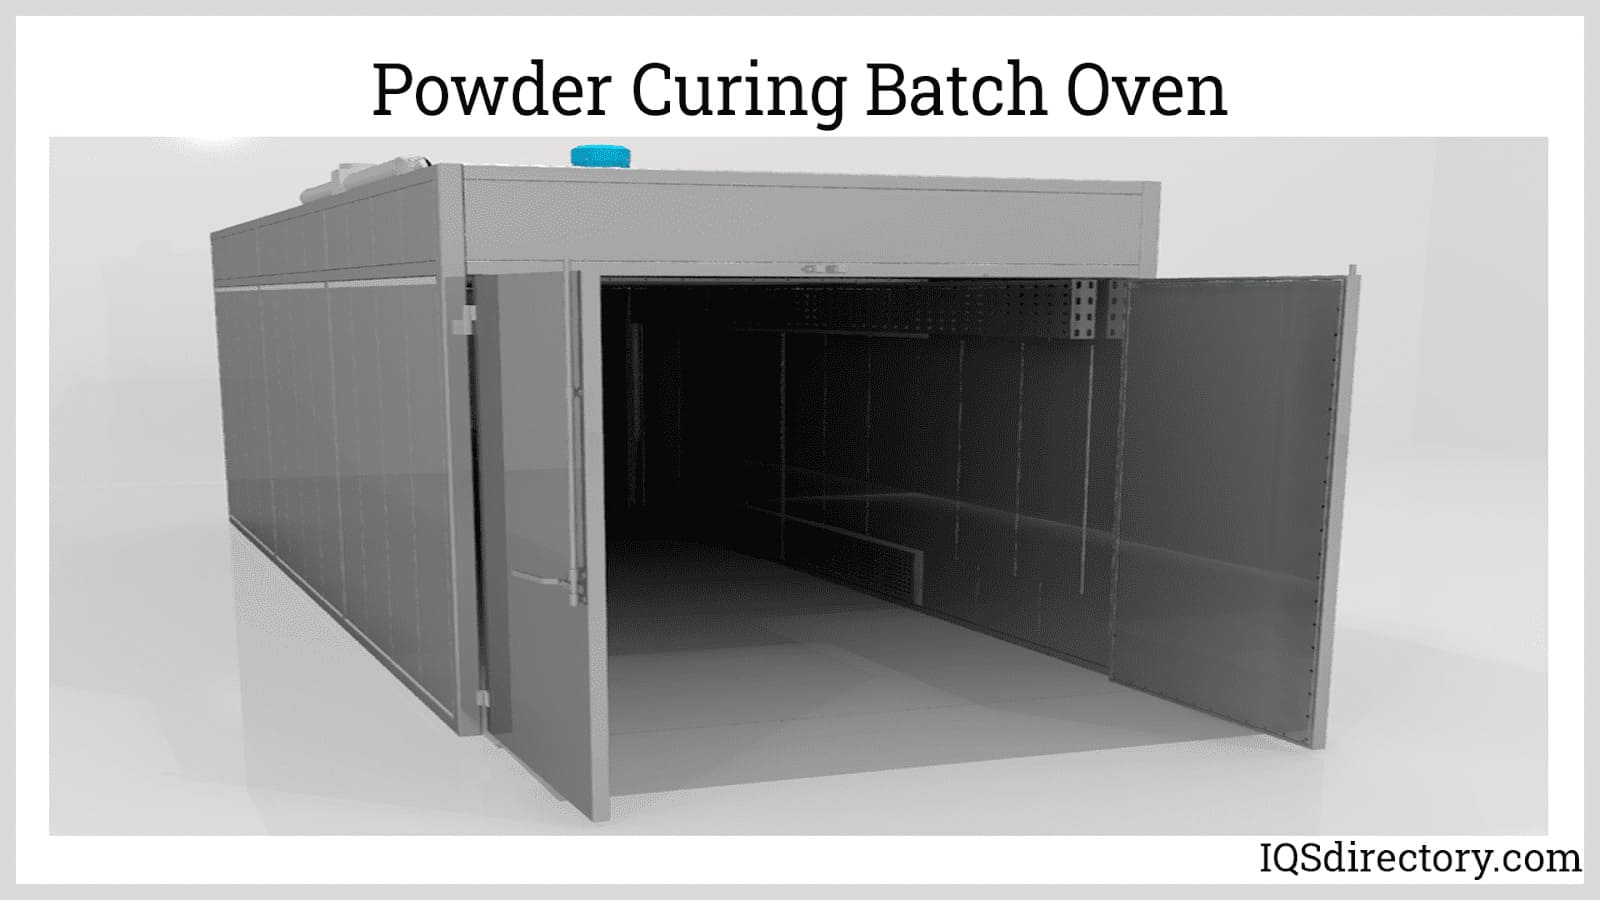 Powder Curing Batch Oven